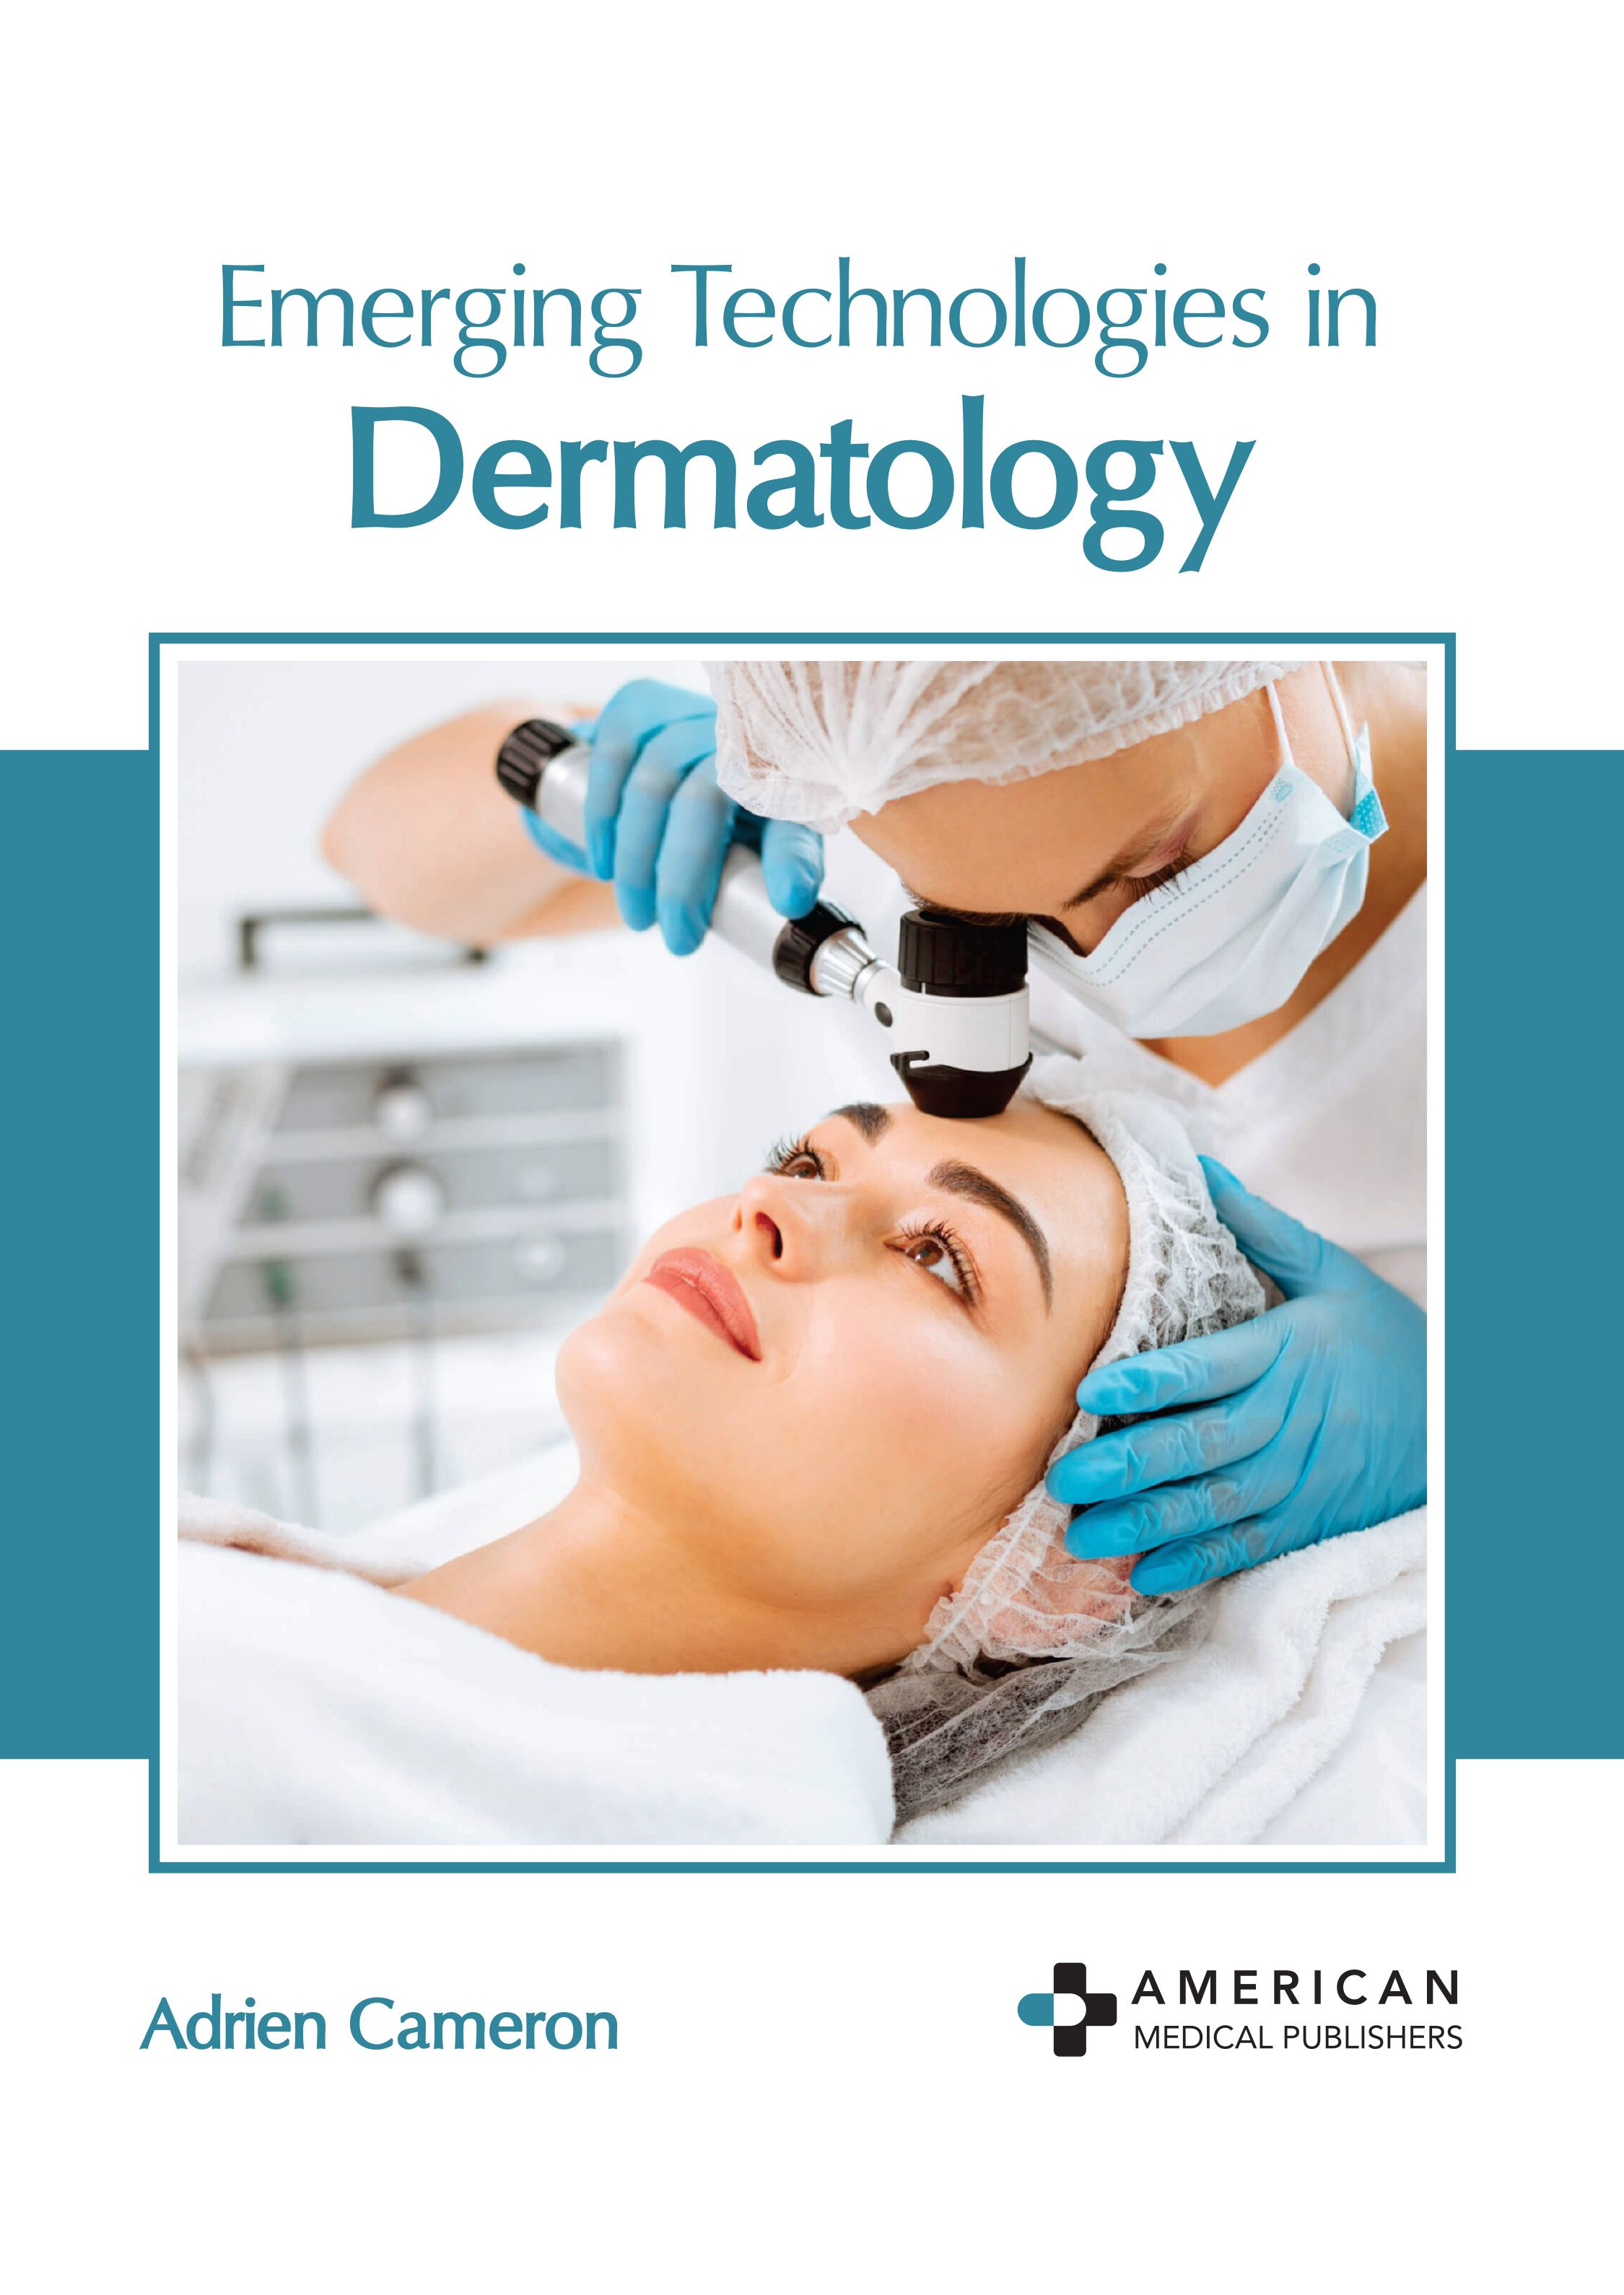 

exclusive-publishers/american-medical-publishers/emerging-technologies-in-dermatology-9798887400914